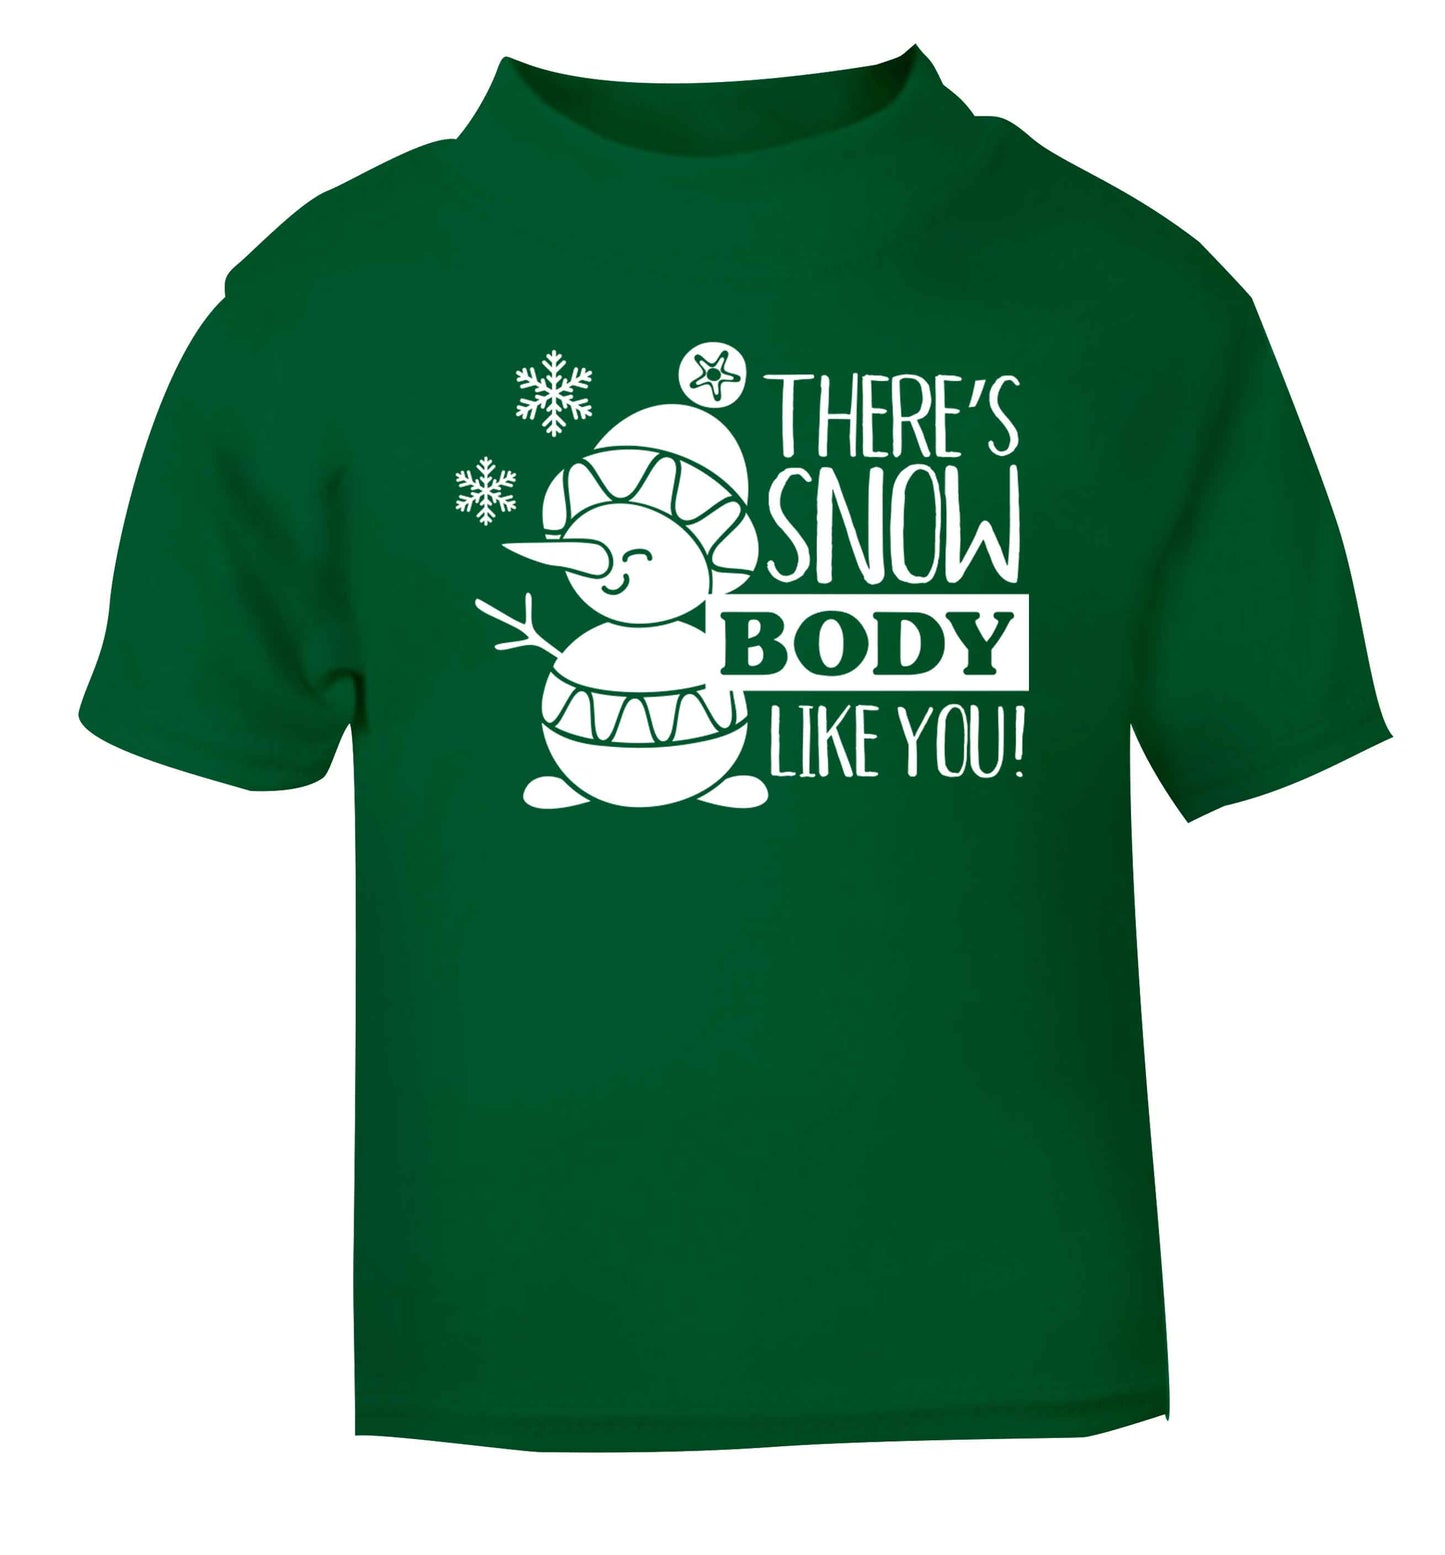 There's snow body like you green baby toddler Tshirt 2 Years